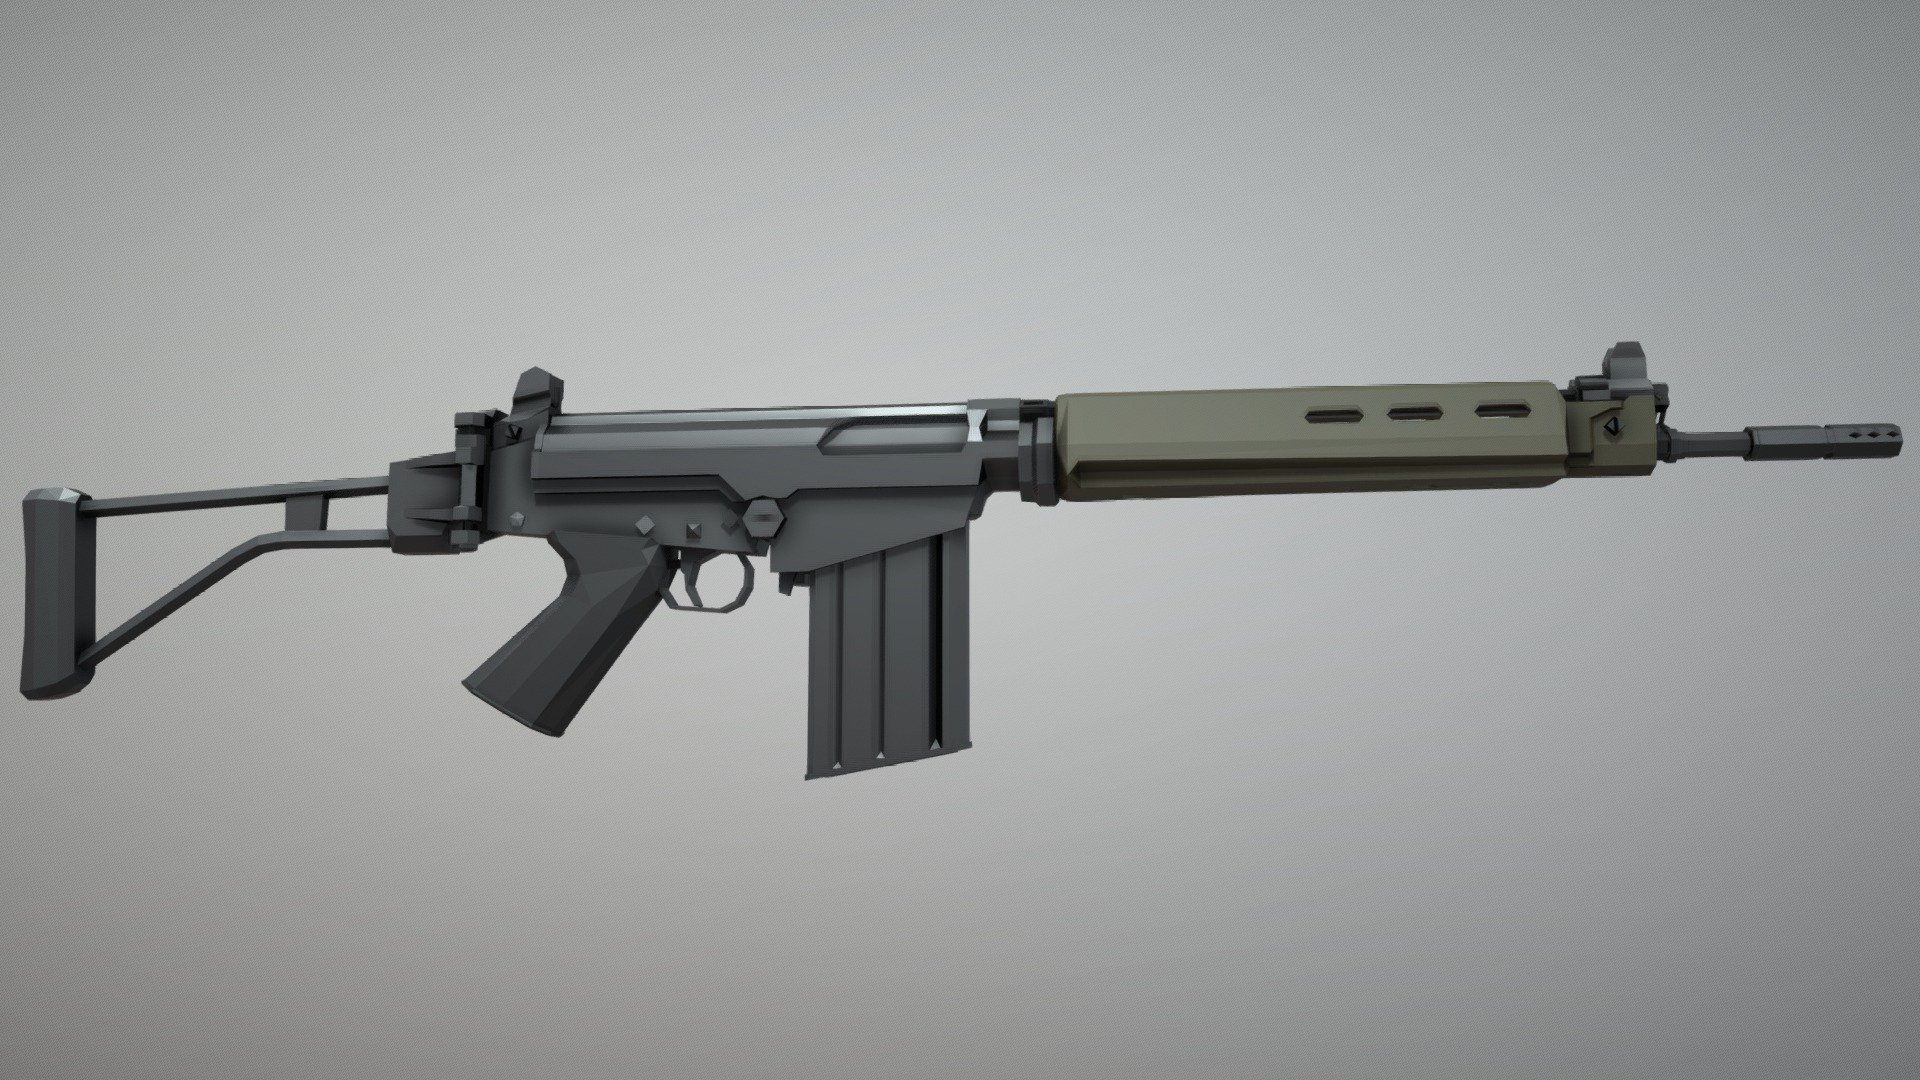 Low-Poly model of the 50.63 variant of the FN FAL, with a folding stock, improved disassembly lever, folding charging handle and fixed rear sight.

note: sights are zeroed to 300 yards (280 meters) - Low-Poly FN FAL Paratrooper - Download Free 3D model by notcplkerry 3d model